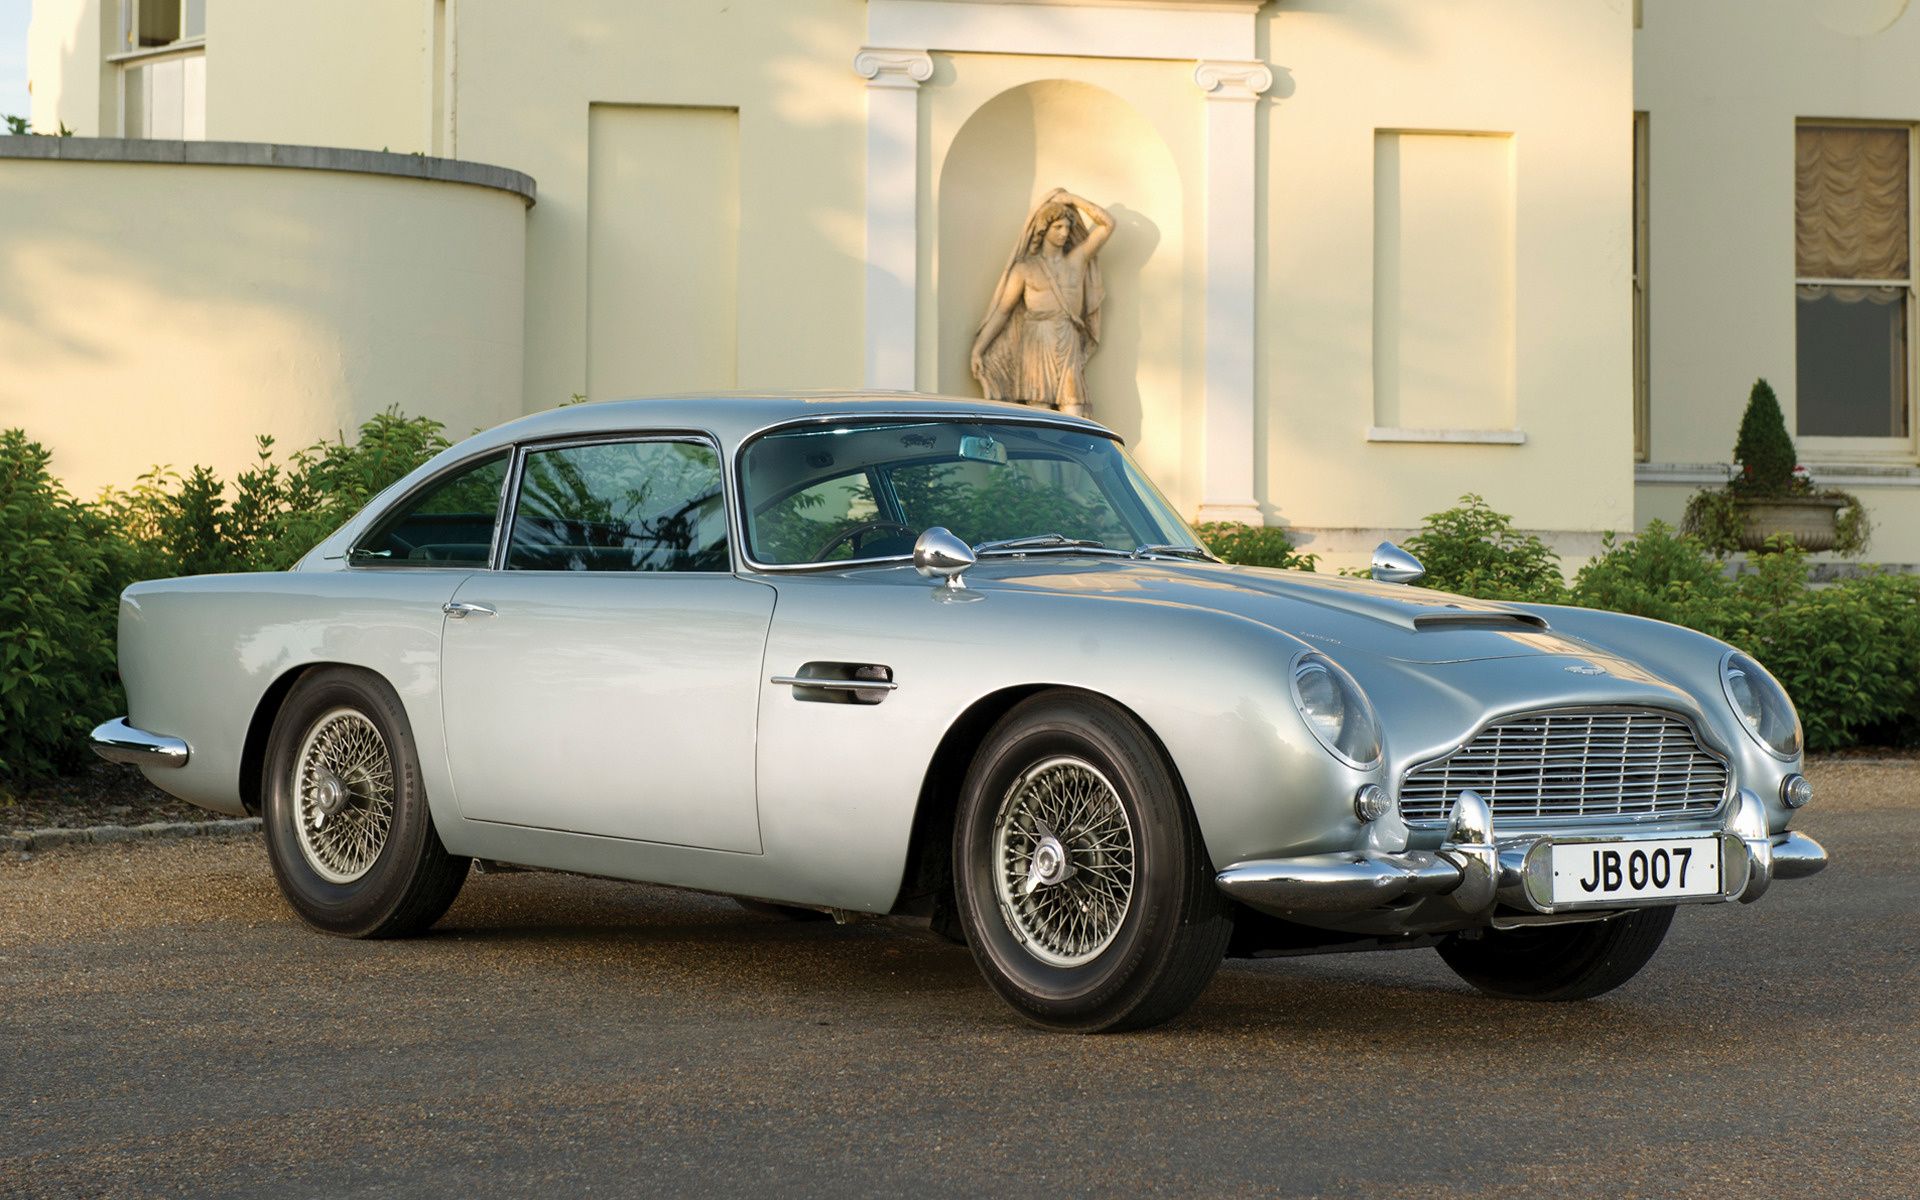 An Image Of A Silver Aston Martin DB5 On The Street